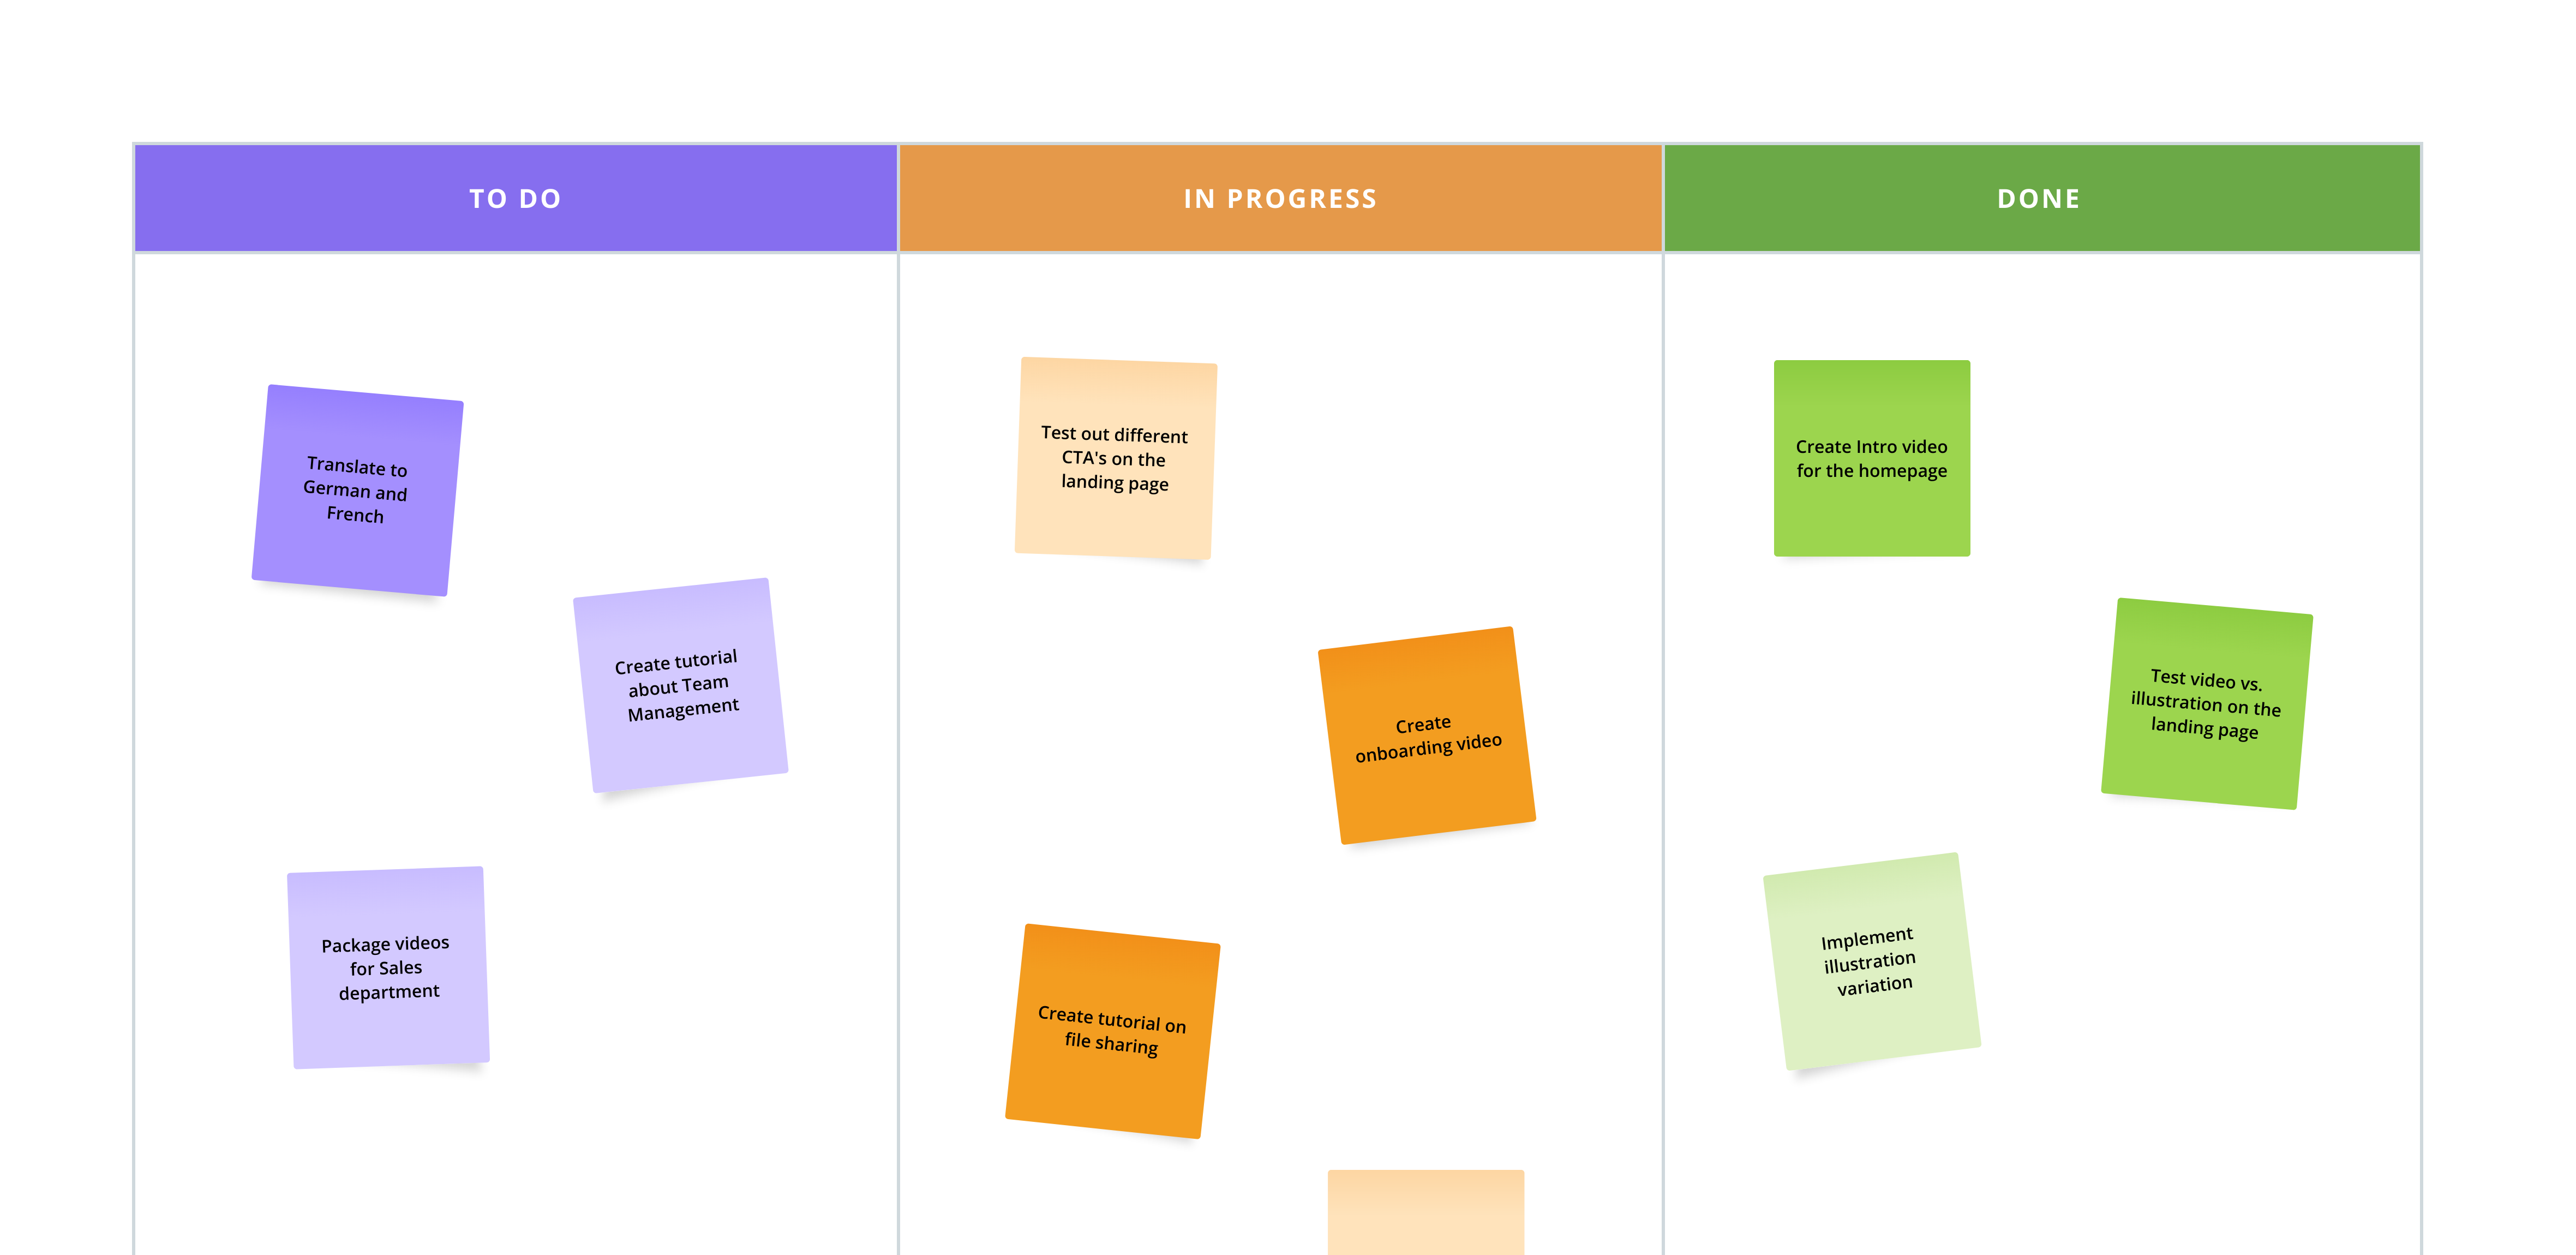 03._Annotations_-_Notes_on_Kanban_Board.png